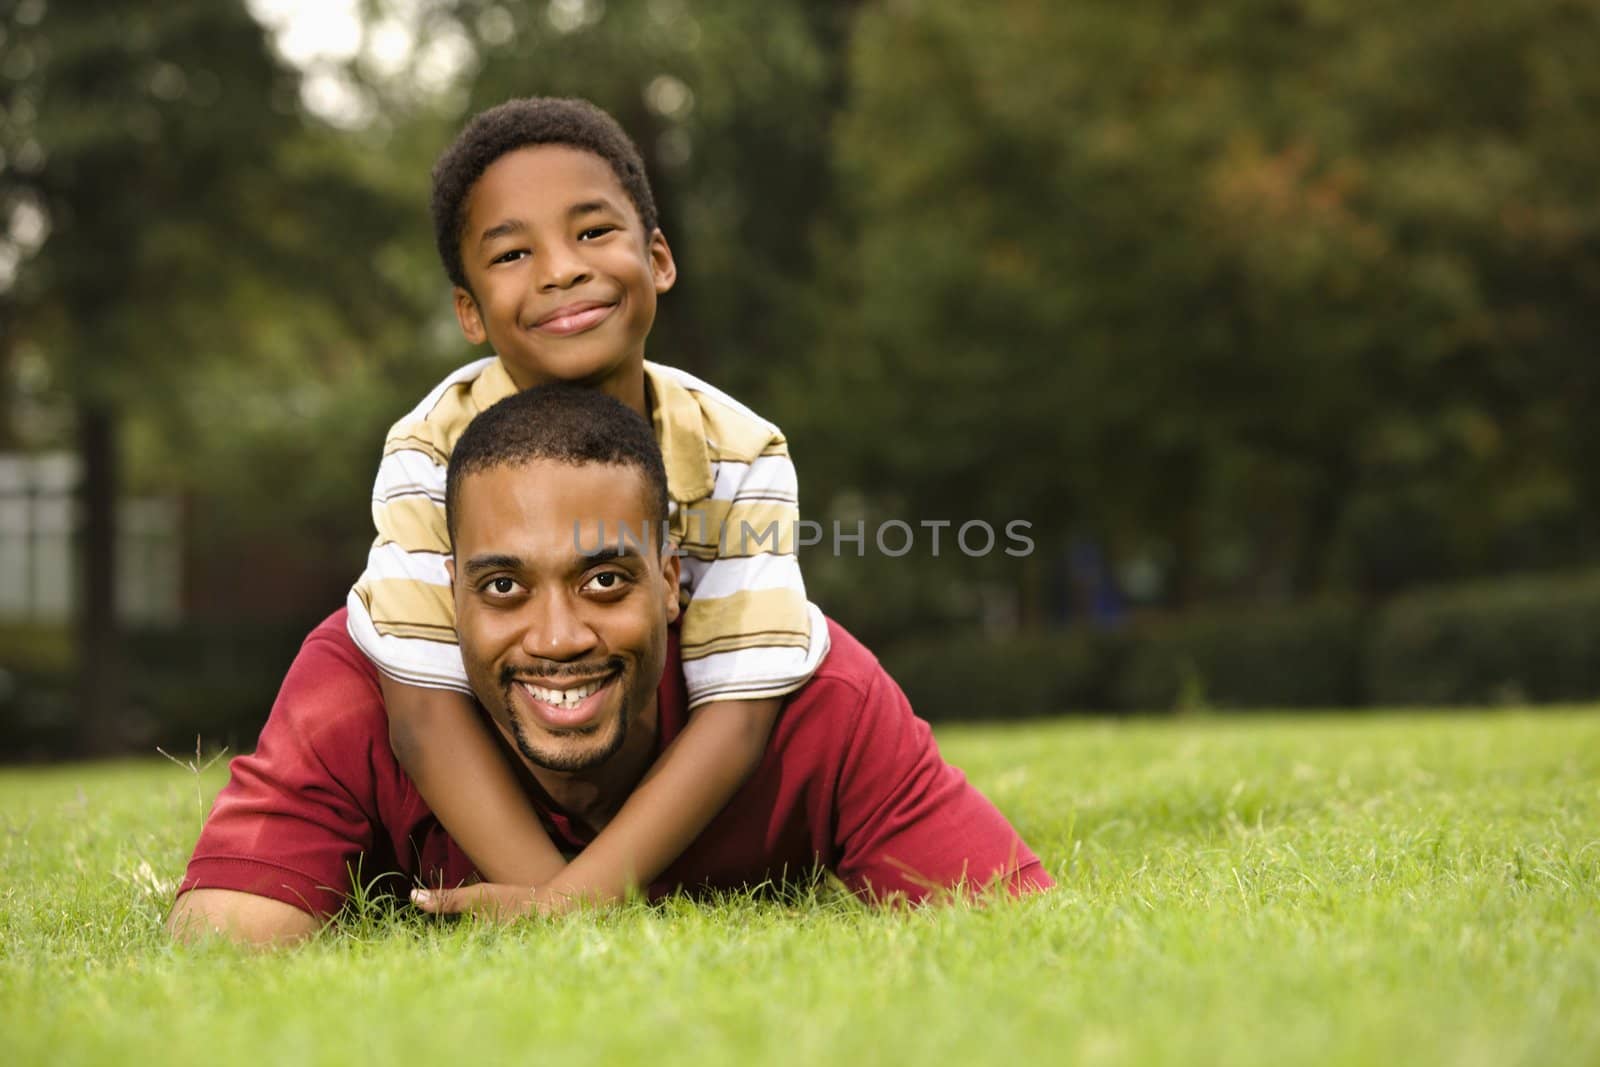 Father lying in grass smiling as son climbs on his back and hugs his neck.